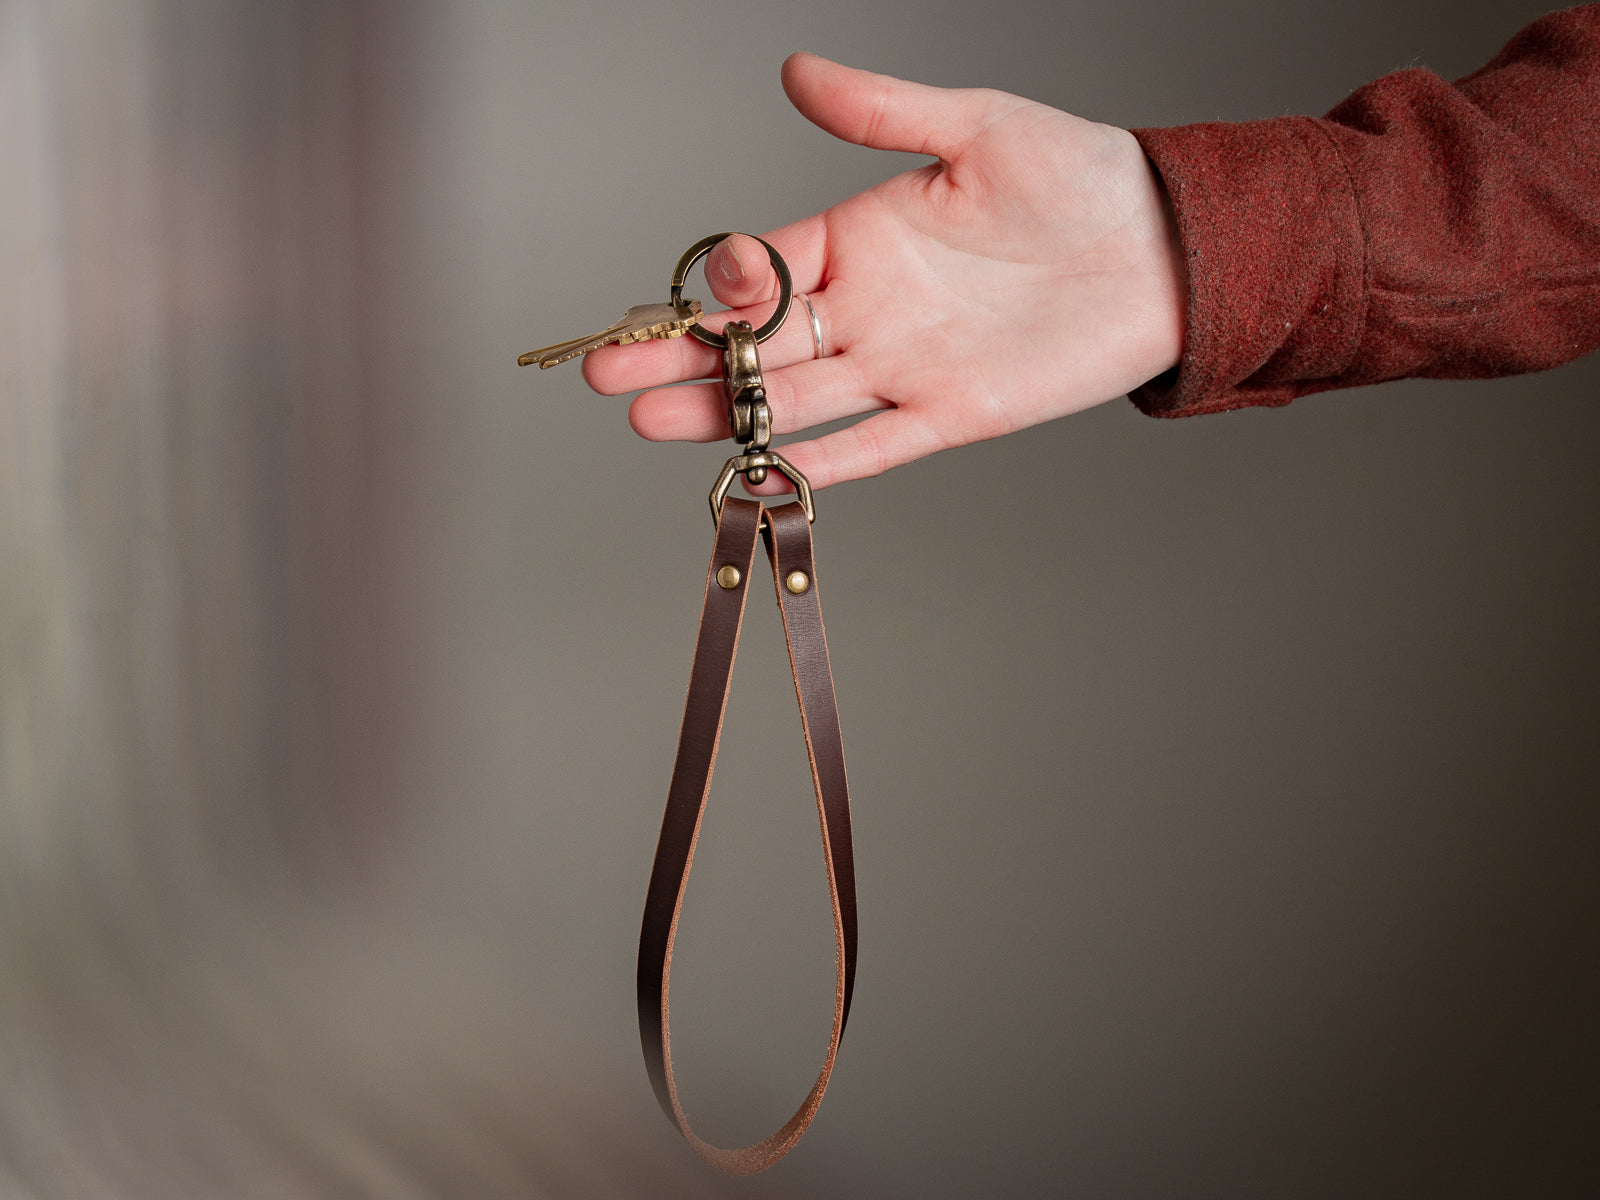 Leather Key Lanyard in brown held in right hand.